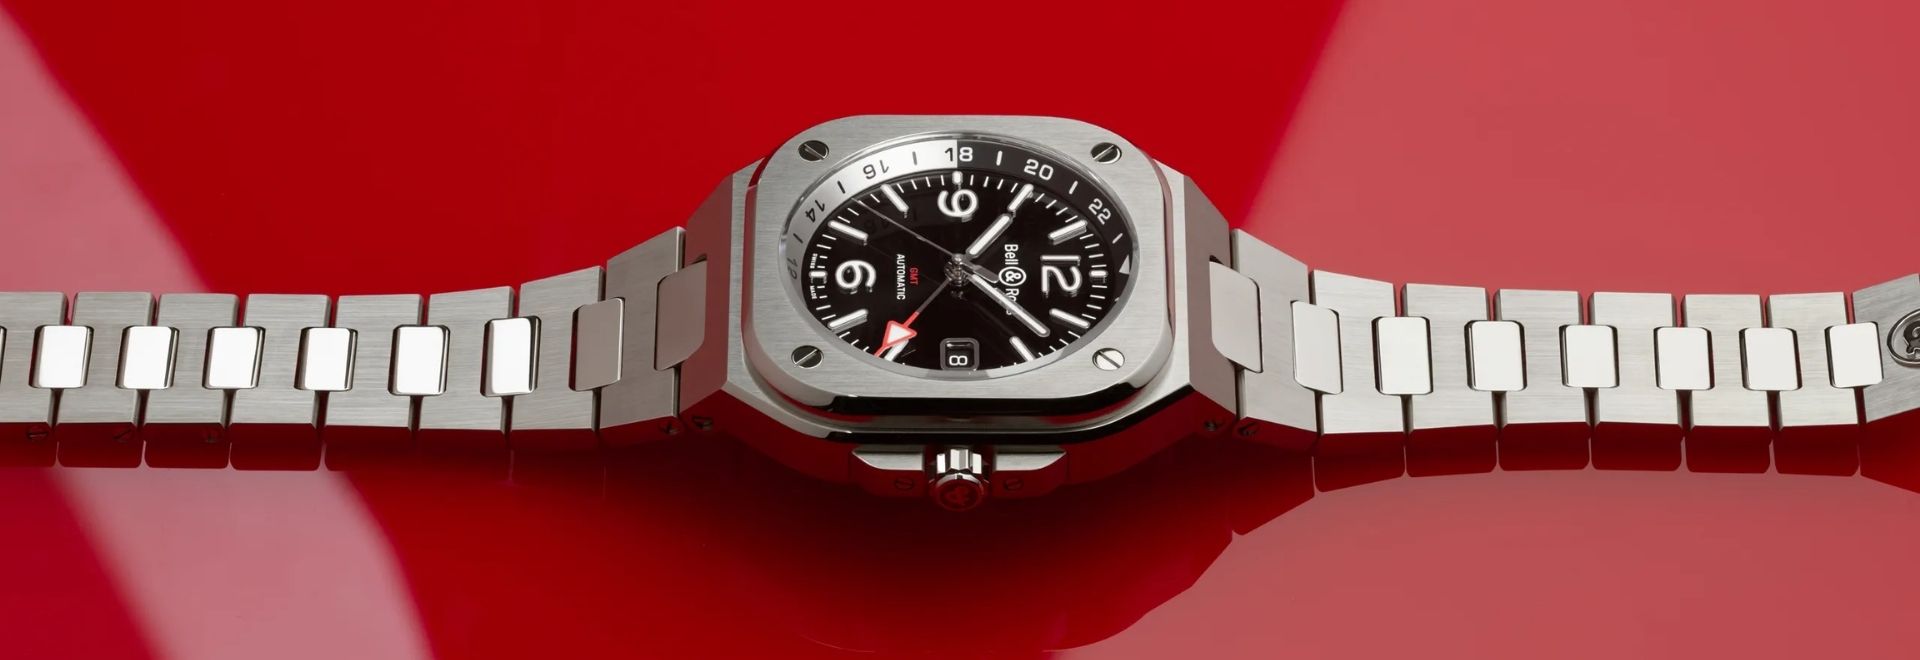 Fighter pilot military style watches from Bell & Ross